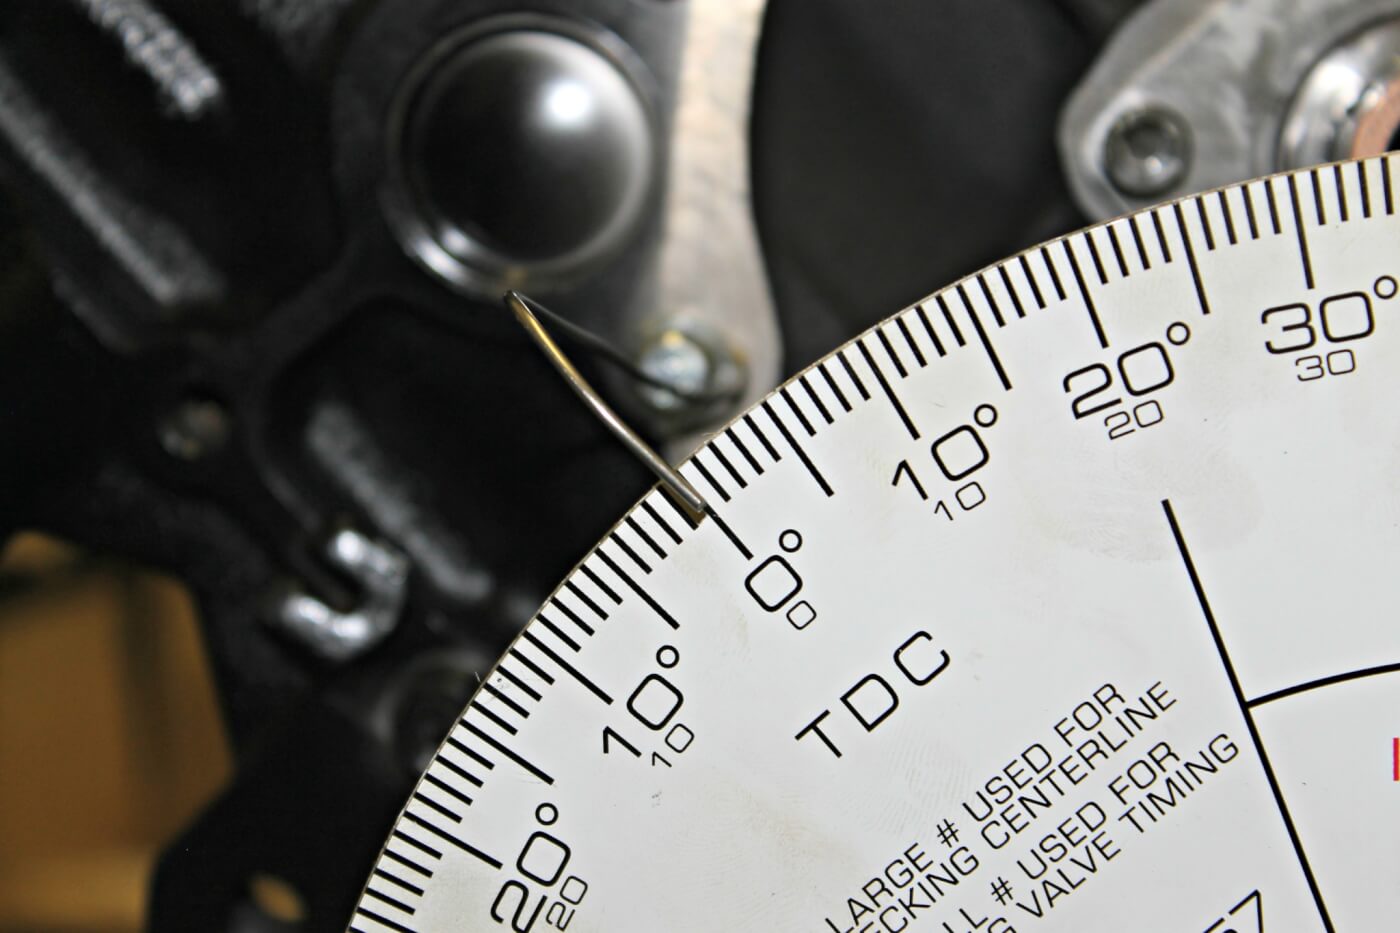 7/8. Using a small wire attached to the engine block, once true TDC is found, the timing wheel can be set at zero according to the pointer. The engine builder then rotates the engine clockwise until the #1 piston again reaches TDC. A mark is then made on the degree wheel where the pointer shows its current location. The crankshaft should then be turned clockwise until #1 TDC is reached again. If the degree wheel was setup properly, the first recorded timing mark and the second should be equal.